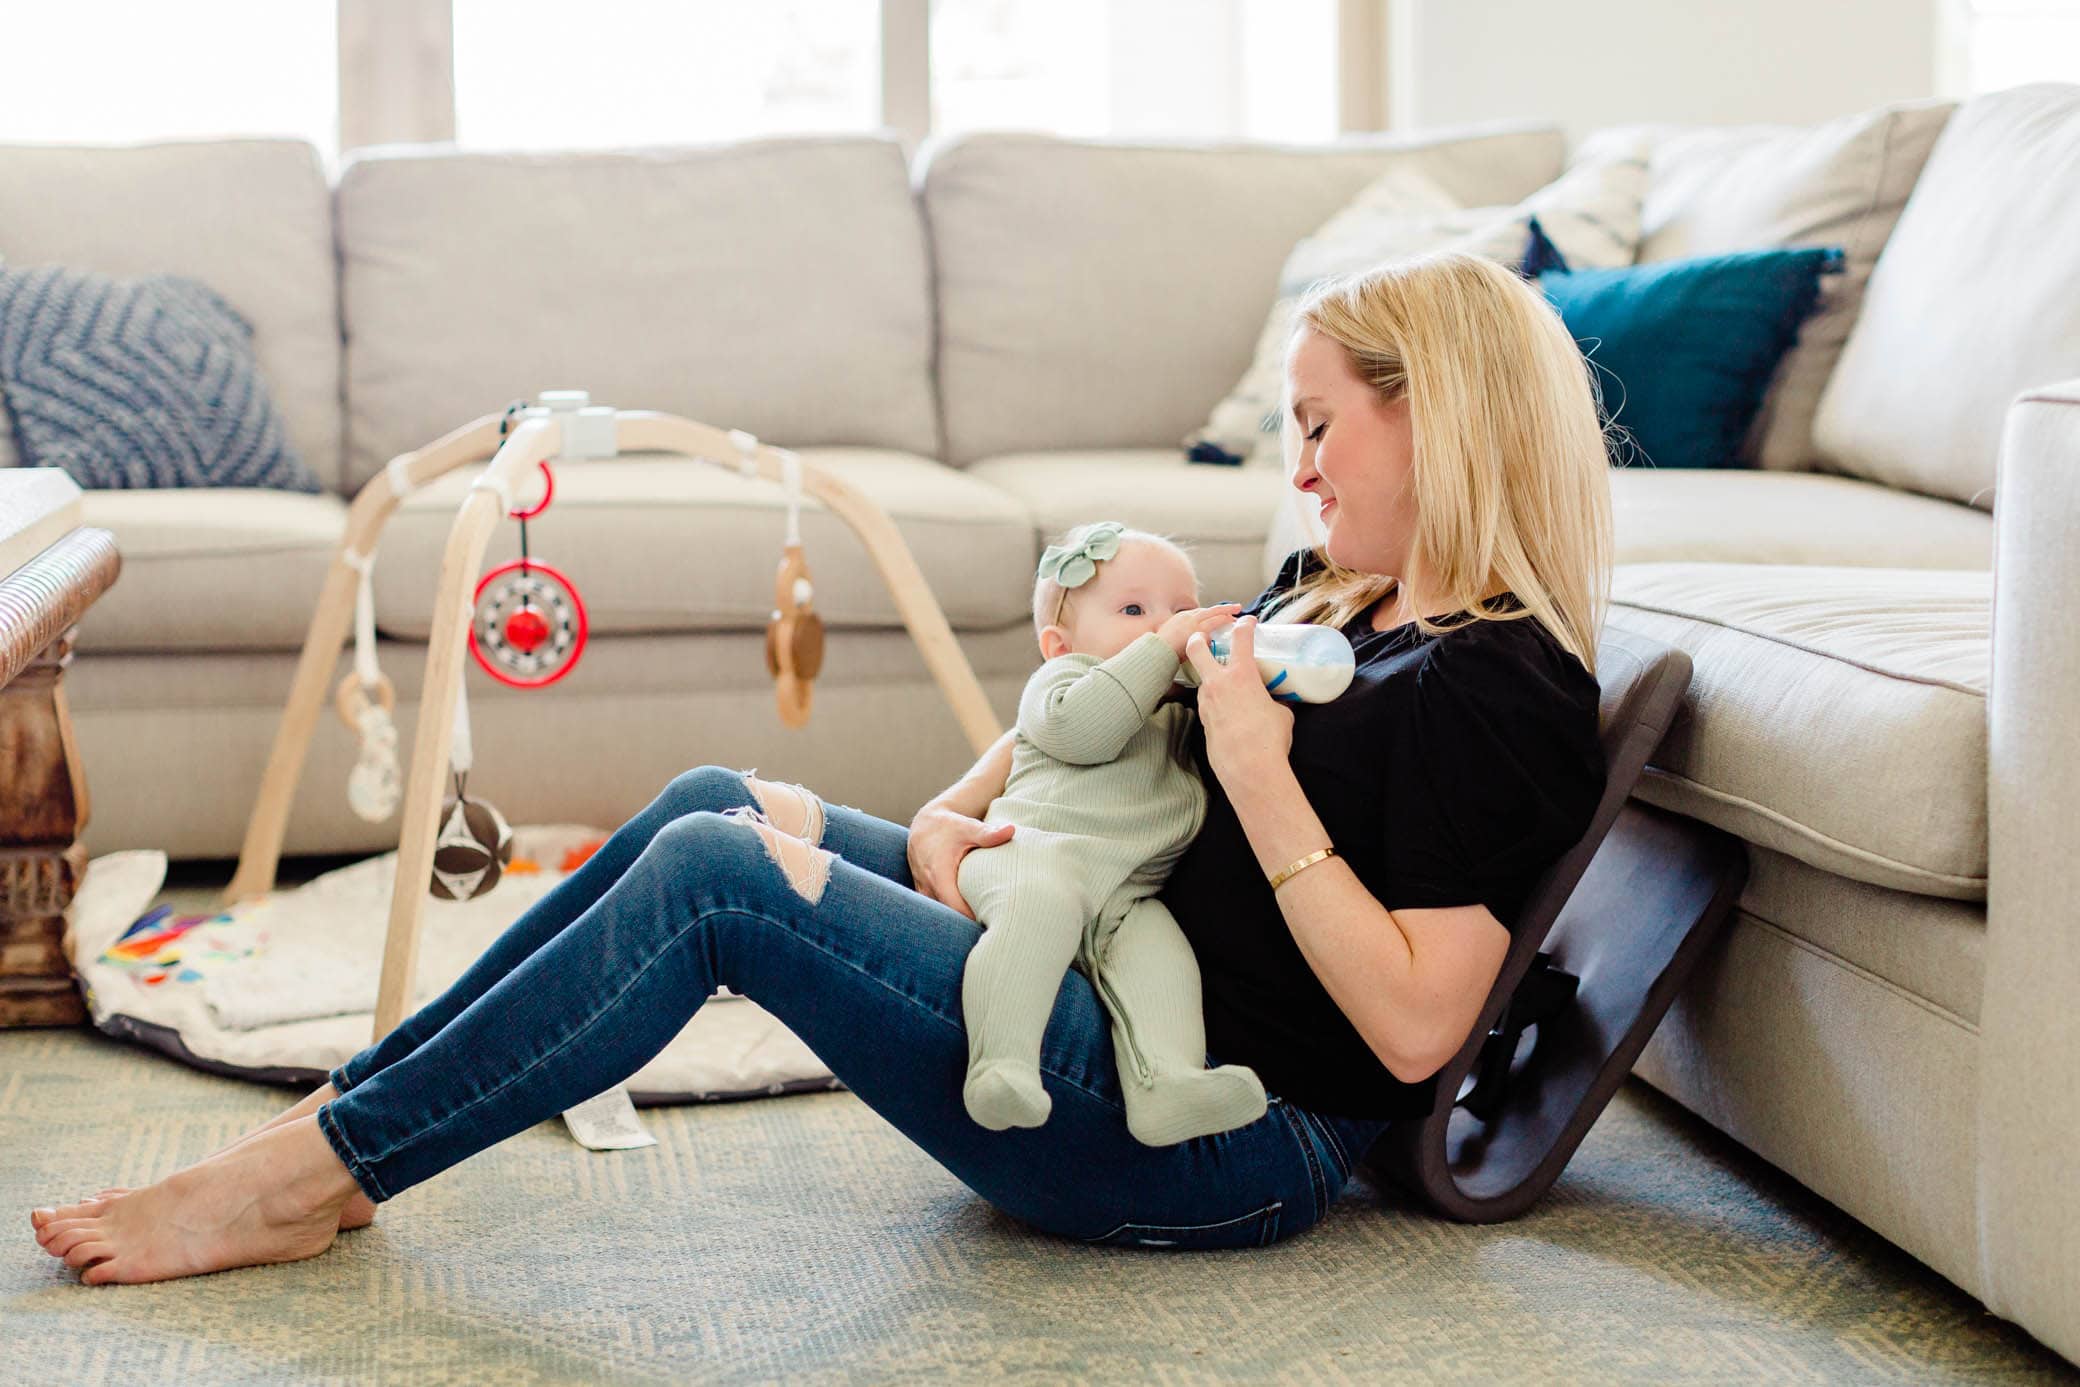 Woman sitting on the floor feeding her daughter a bottle while using the Ready Rocker against the sofa.